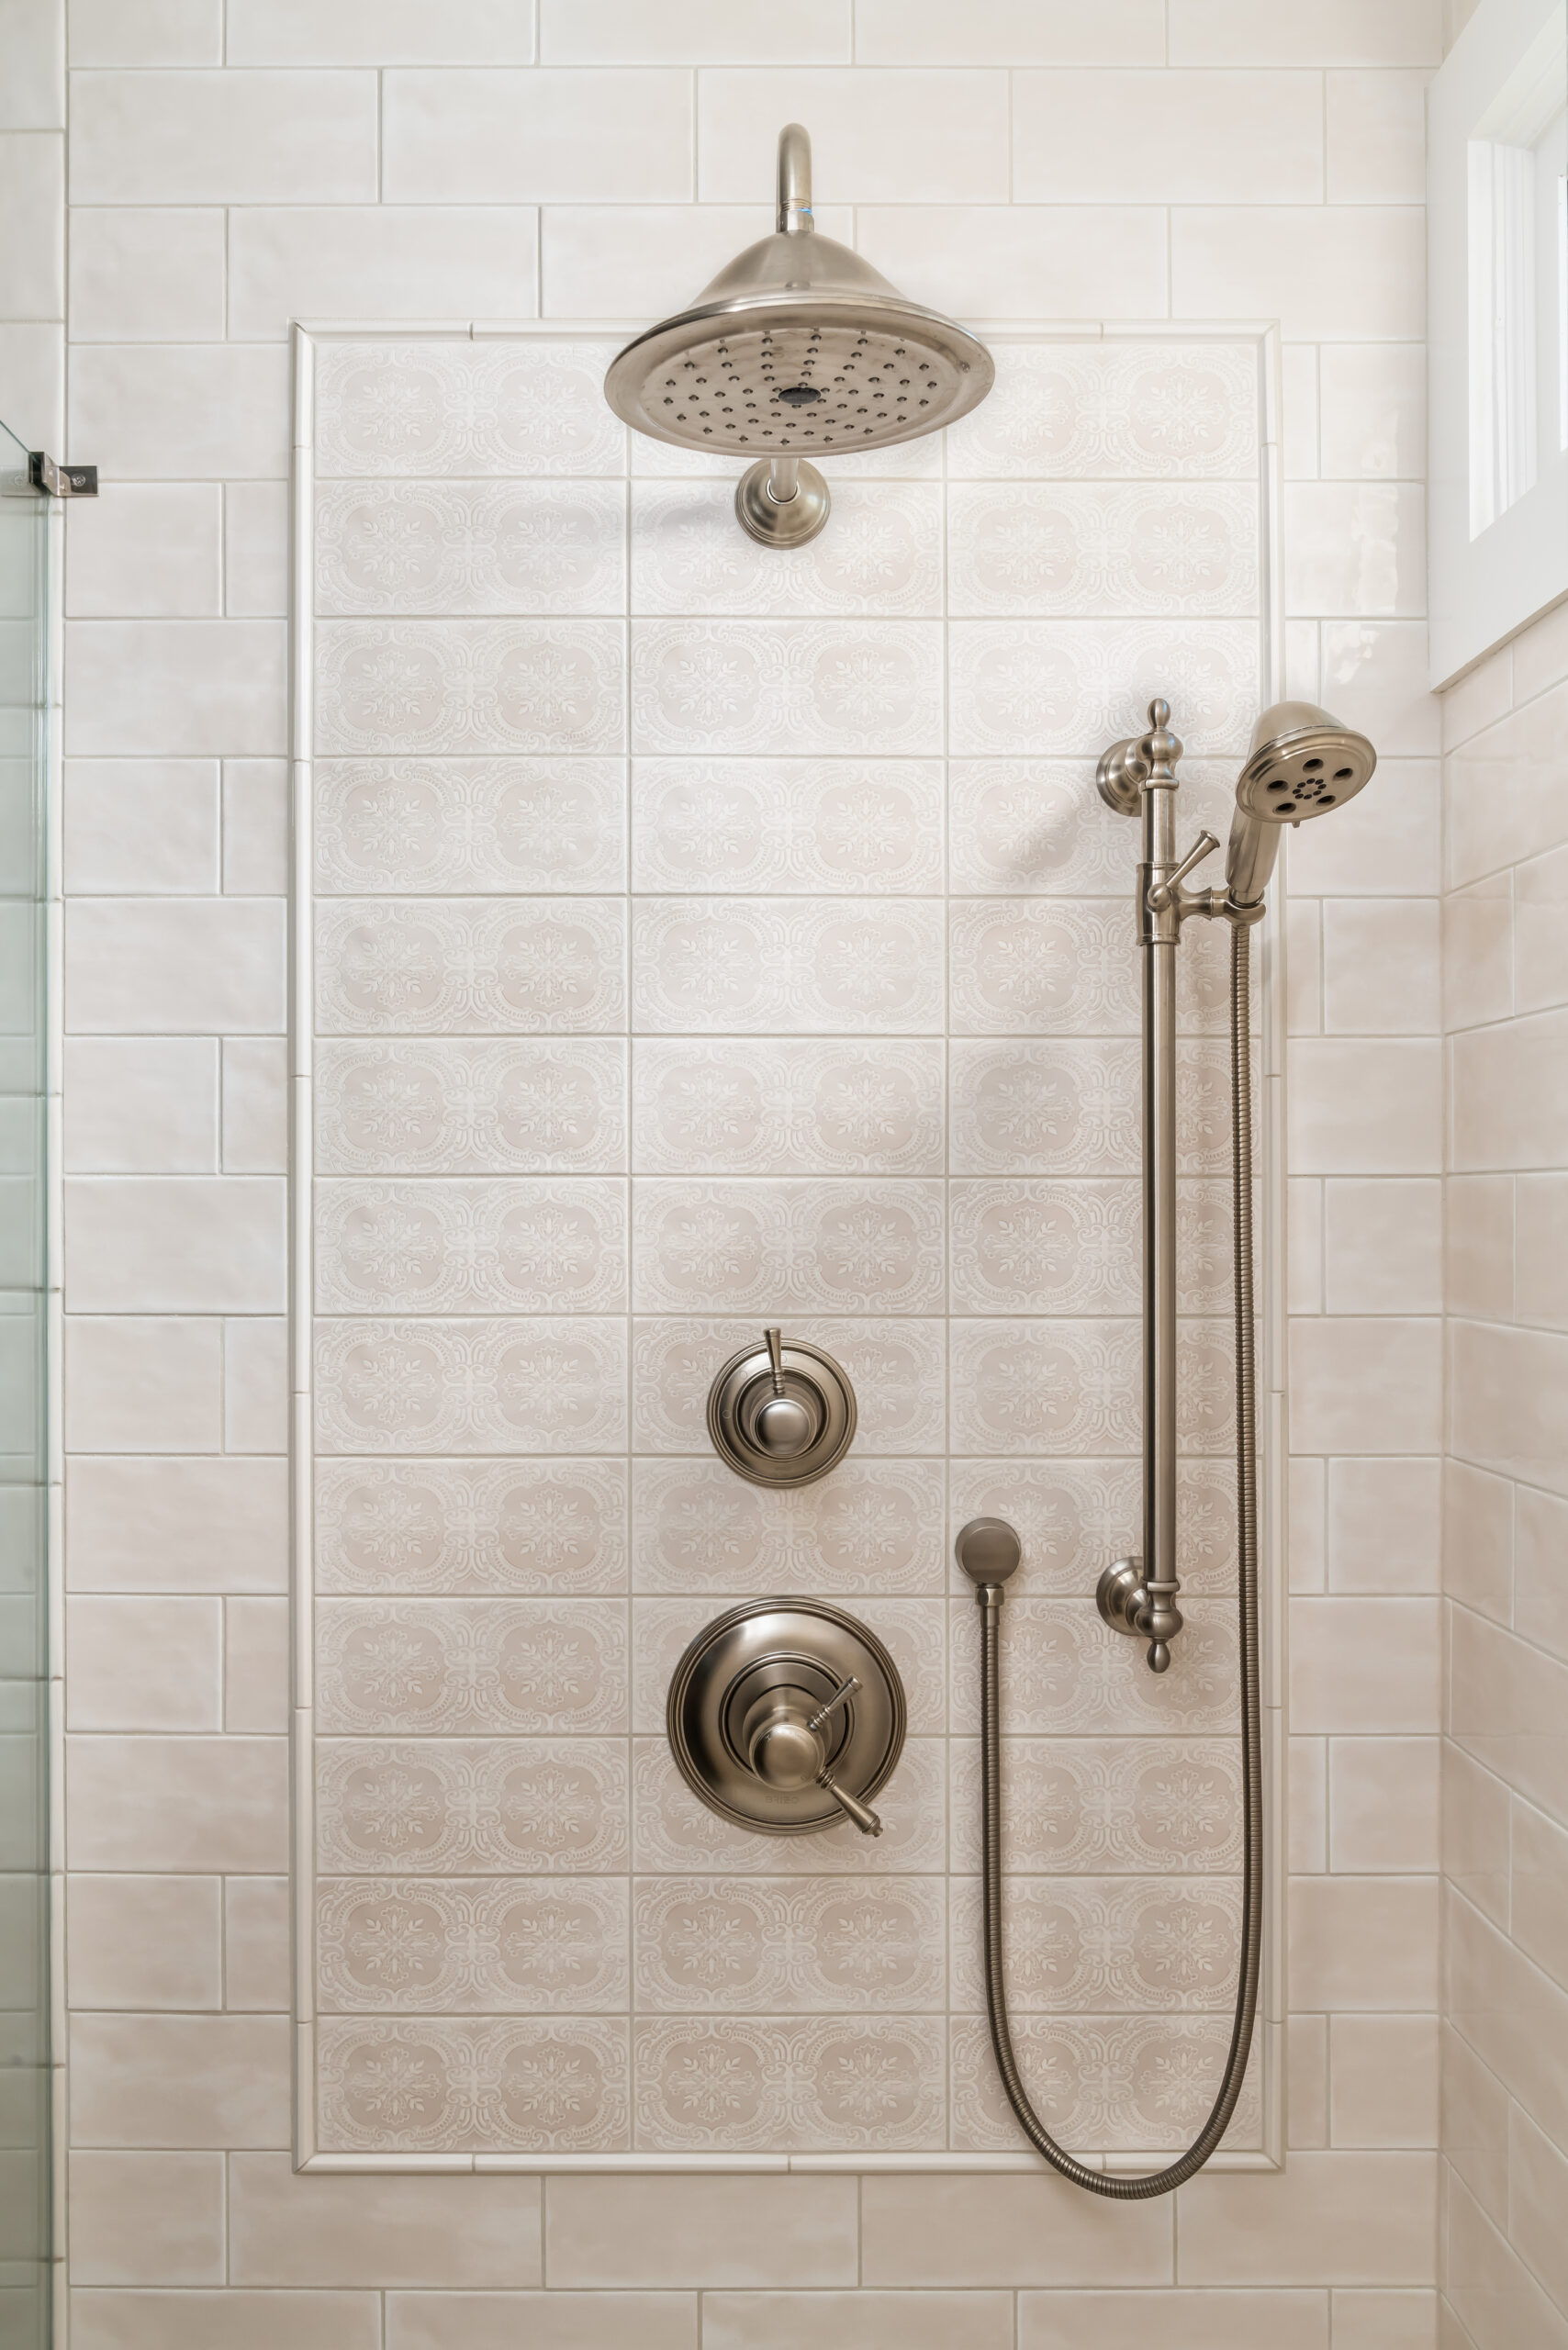 faucet wall in shower, patterned tile